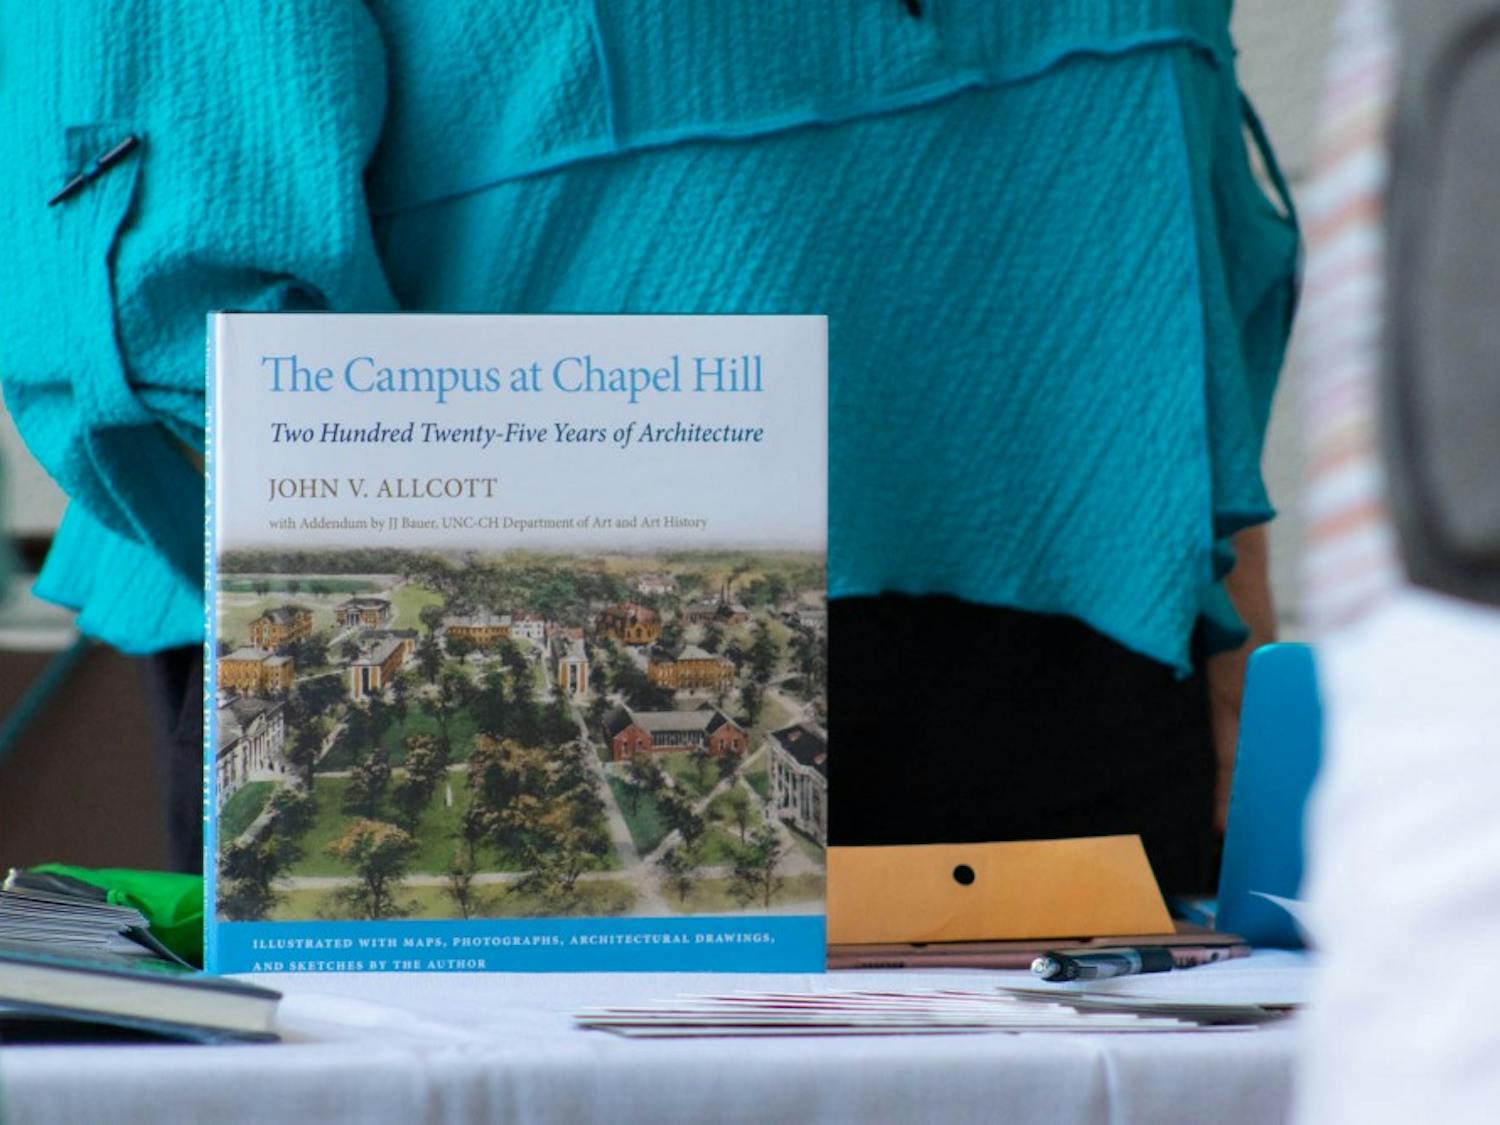 "The Campus at Chapel Hill" by John V. Allcott was recently updated with an addendum by UNC Visual Resources Curator and Teaching Assistant Professor JJ Bauer.&nbsp;